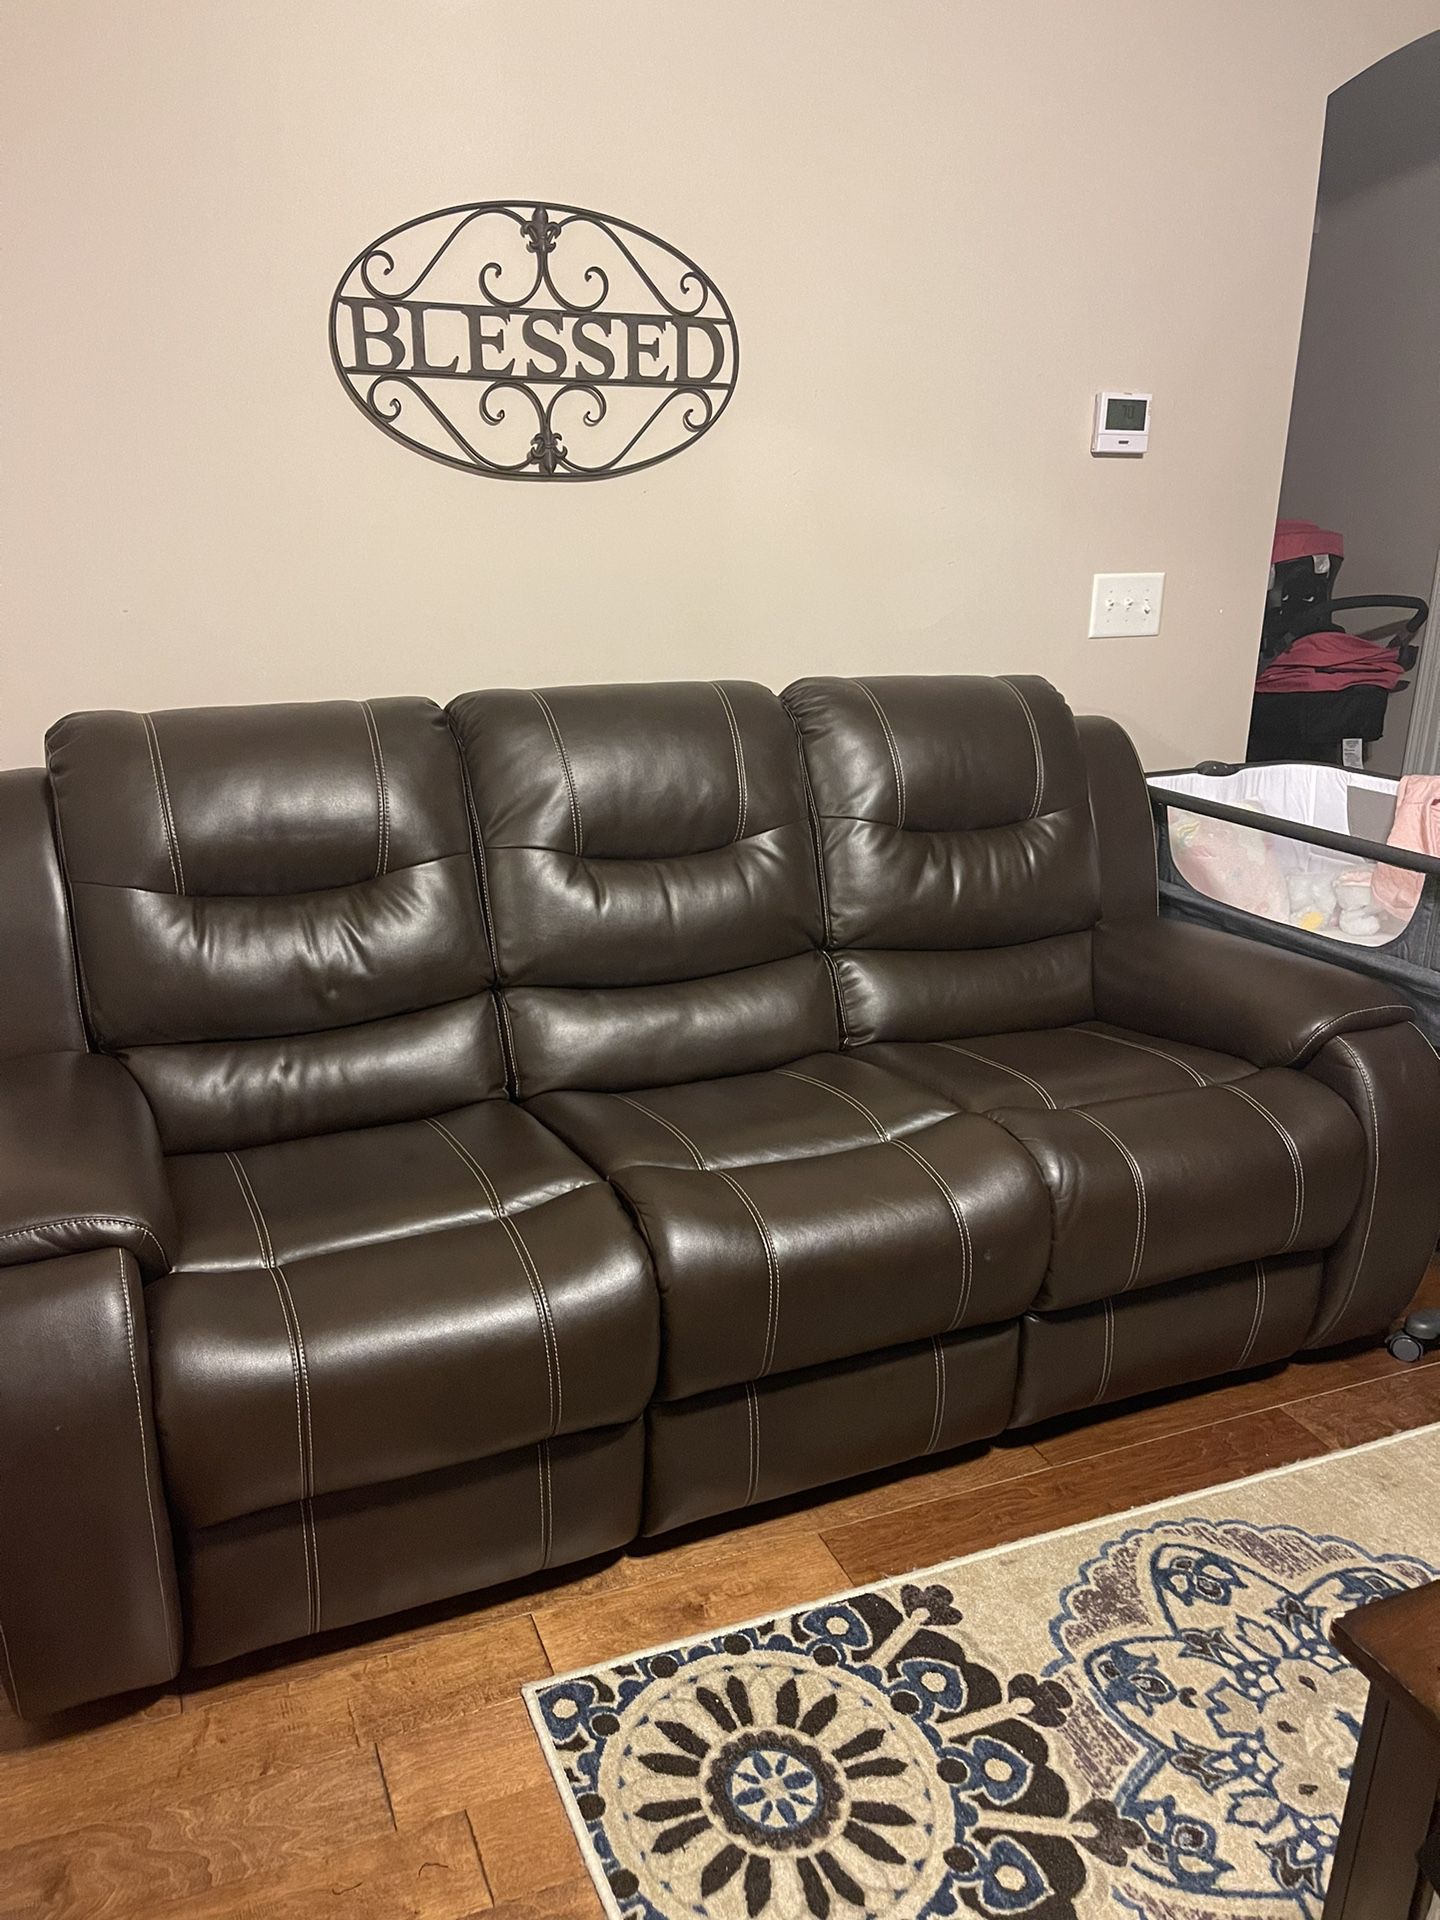 Chocolate leather Reclining Living room set 